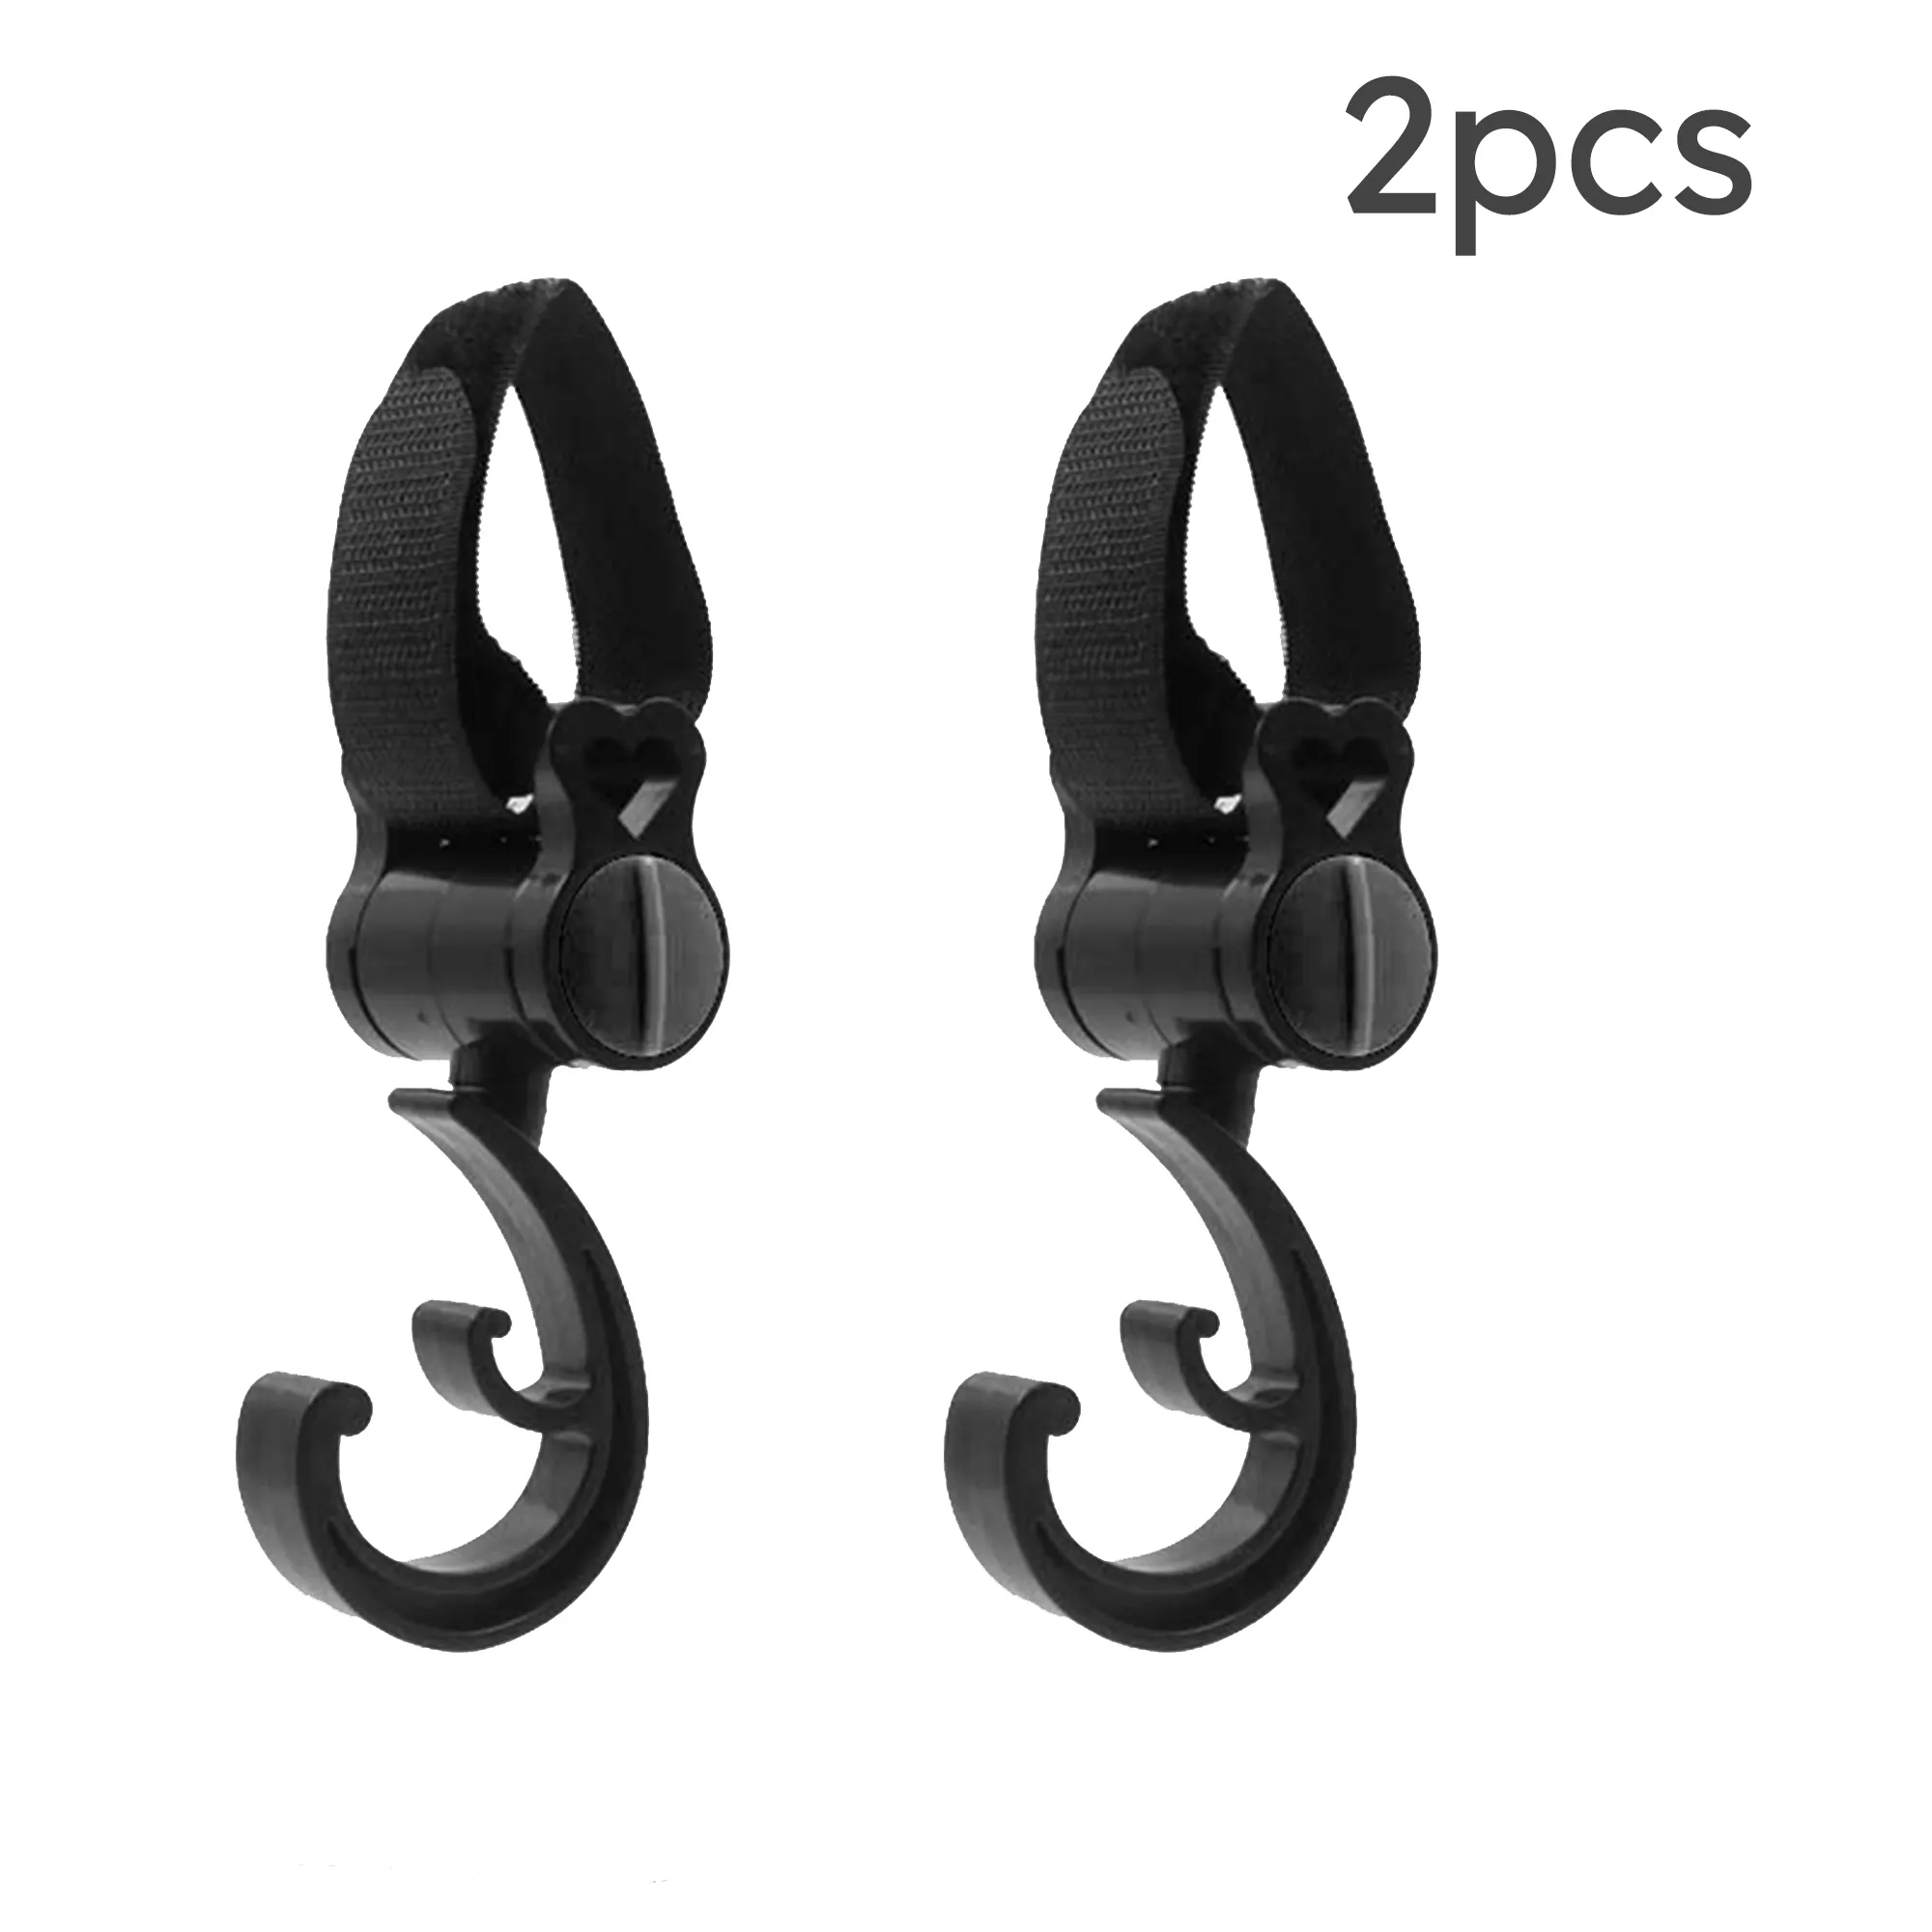 360deg Rotating Hook for Baby Strollers and Cribs - Multifunctional Hanger for Diaper Bags and Shopp